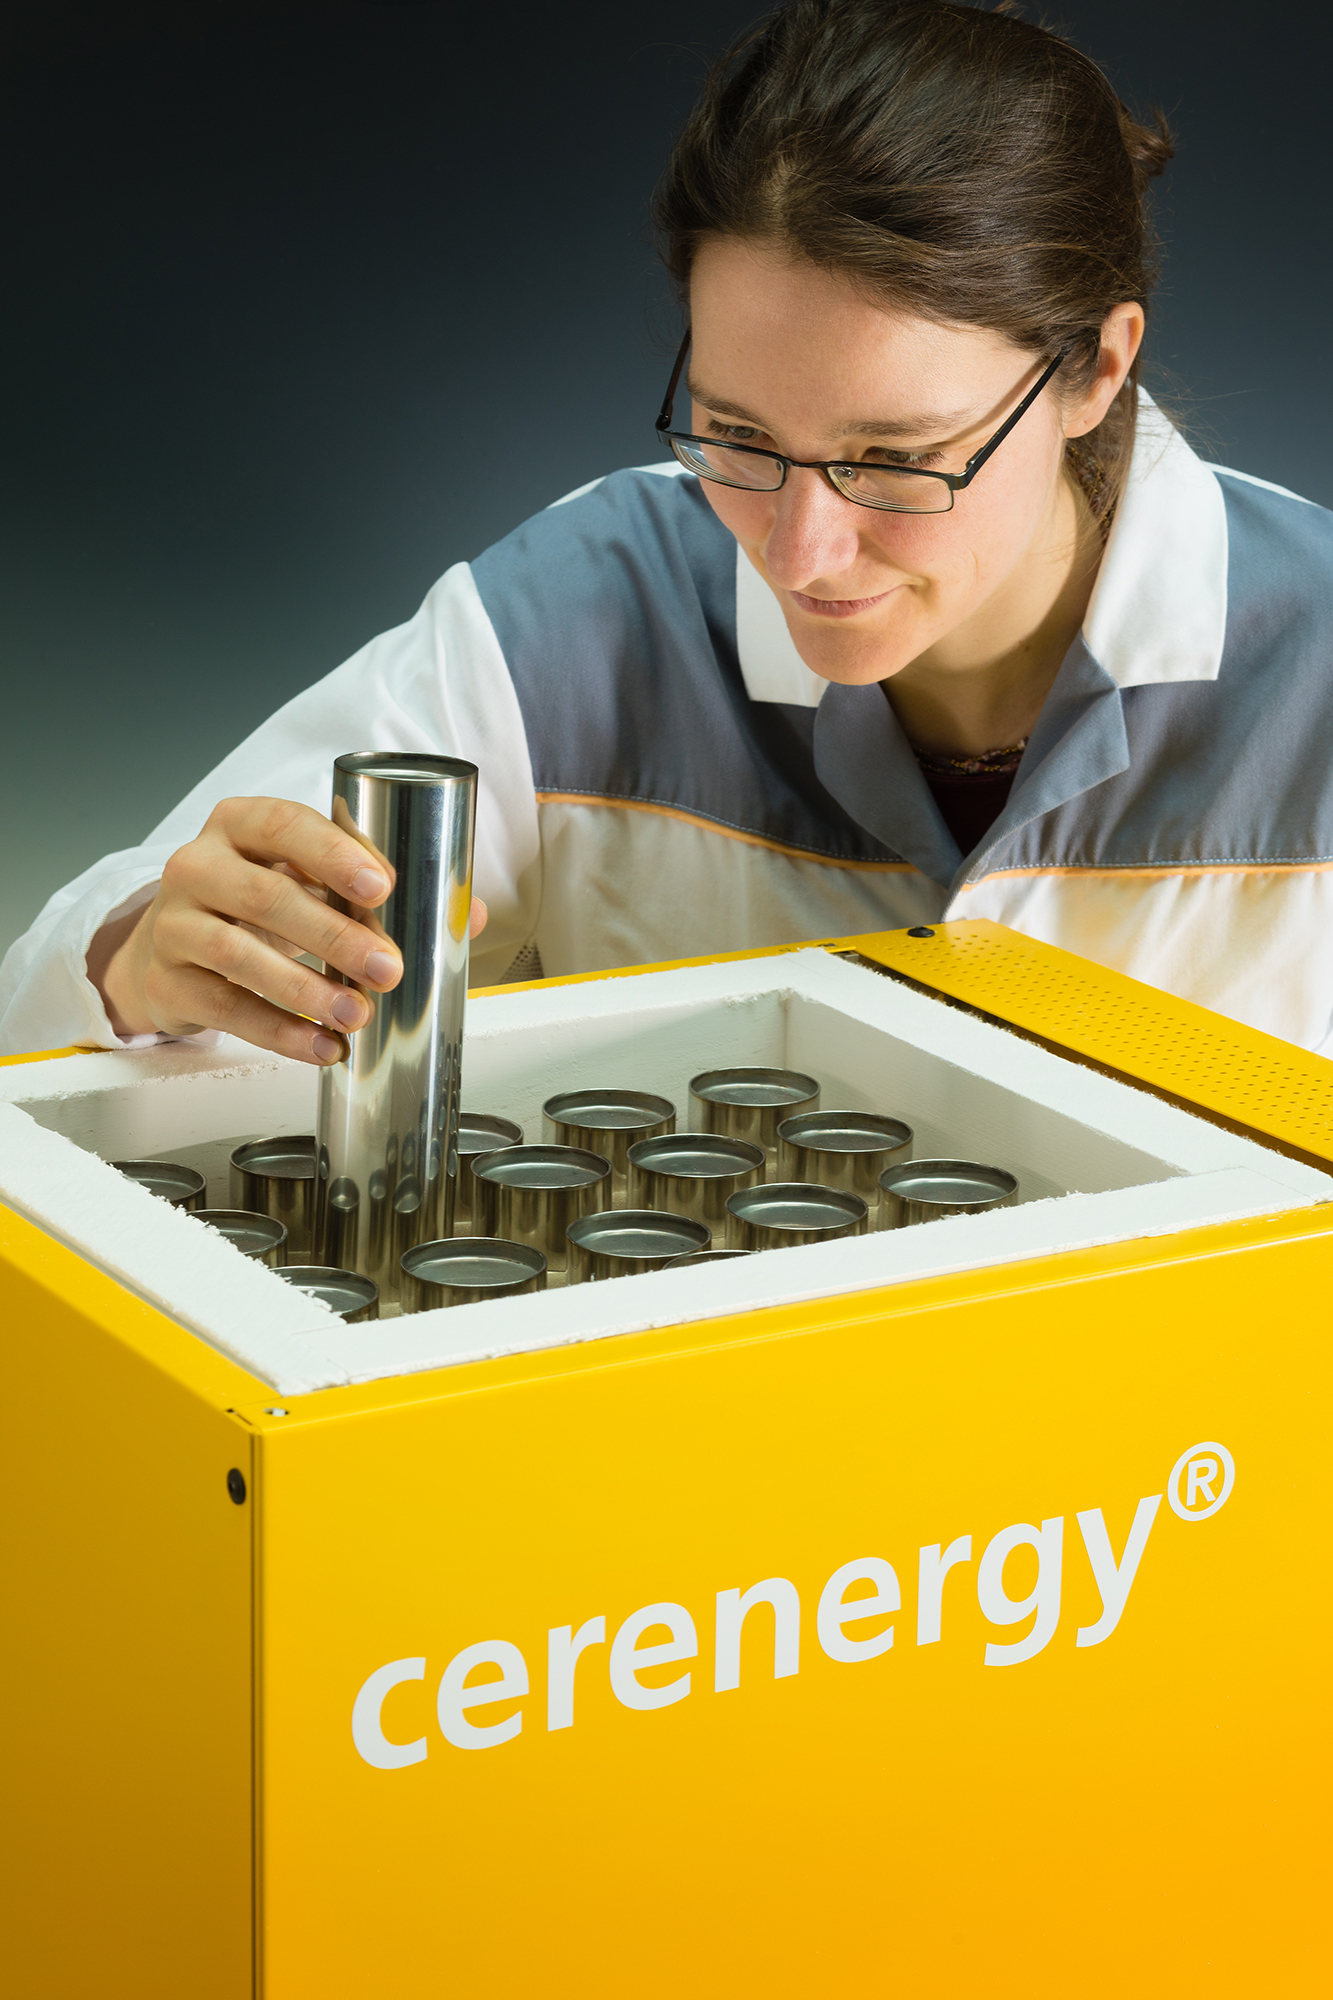 cerenergy® – Eco-friendly and inexpensive sodium battery for stationary energy storage.